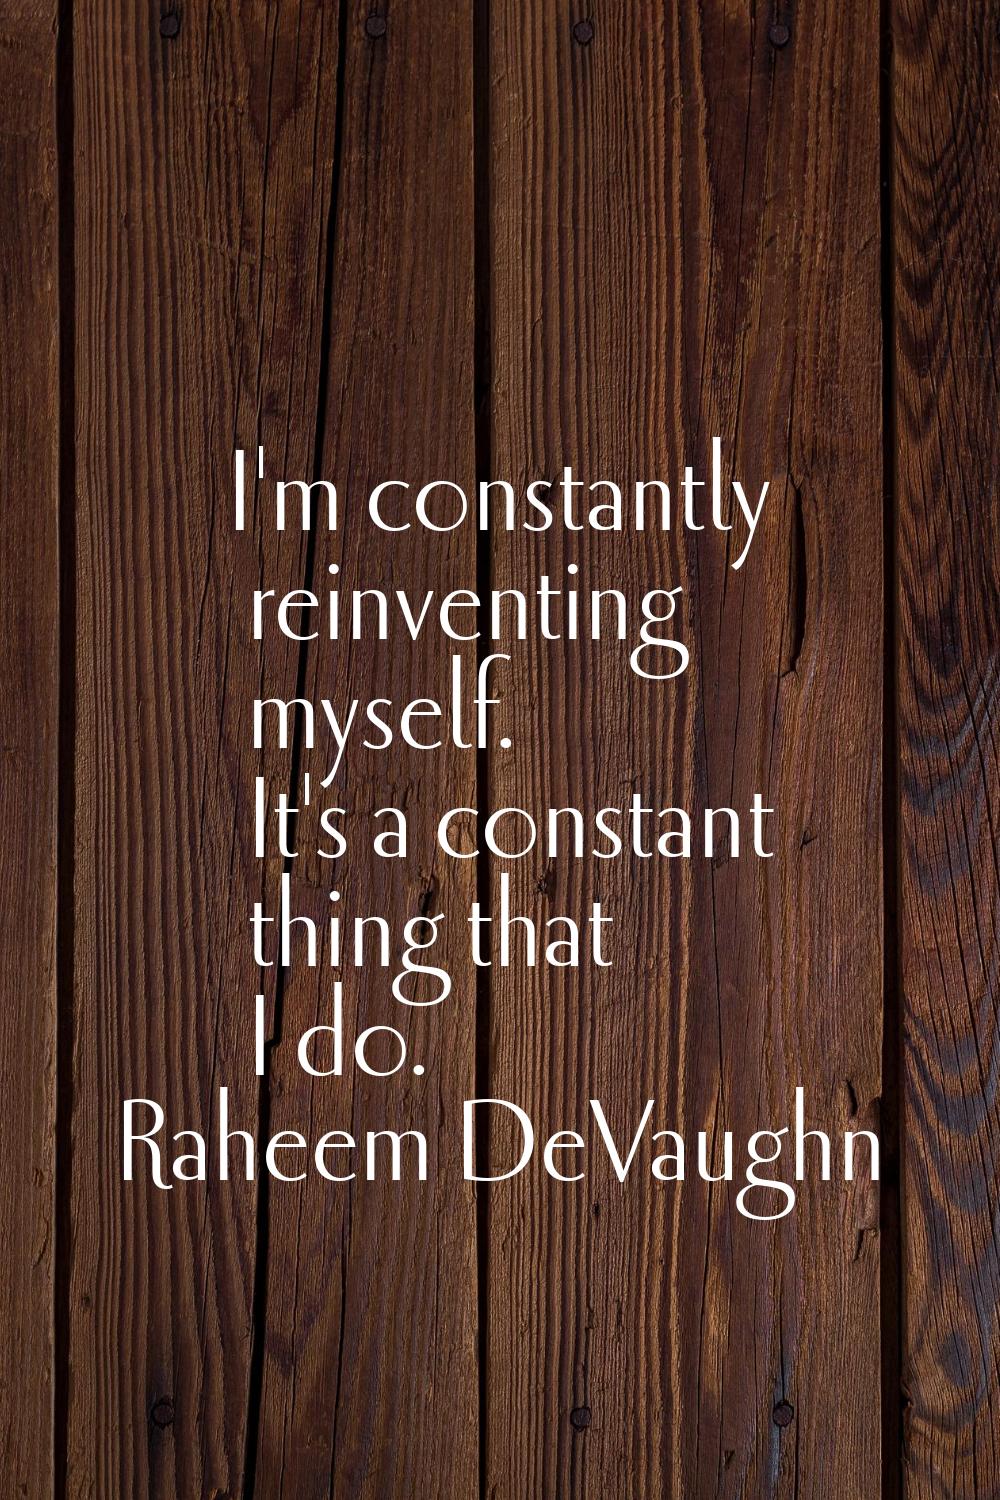 I'm constantly reinventing myself. It's a constant thing that I do.